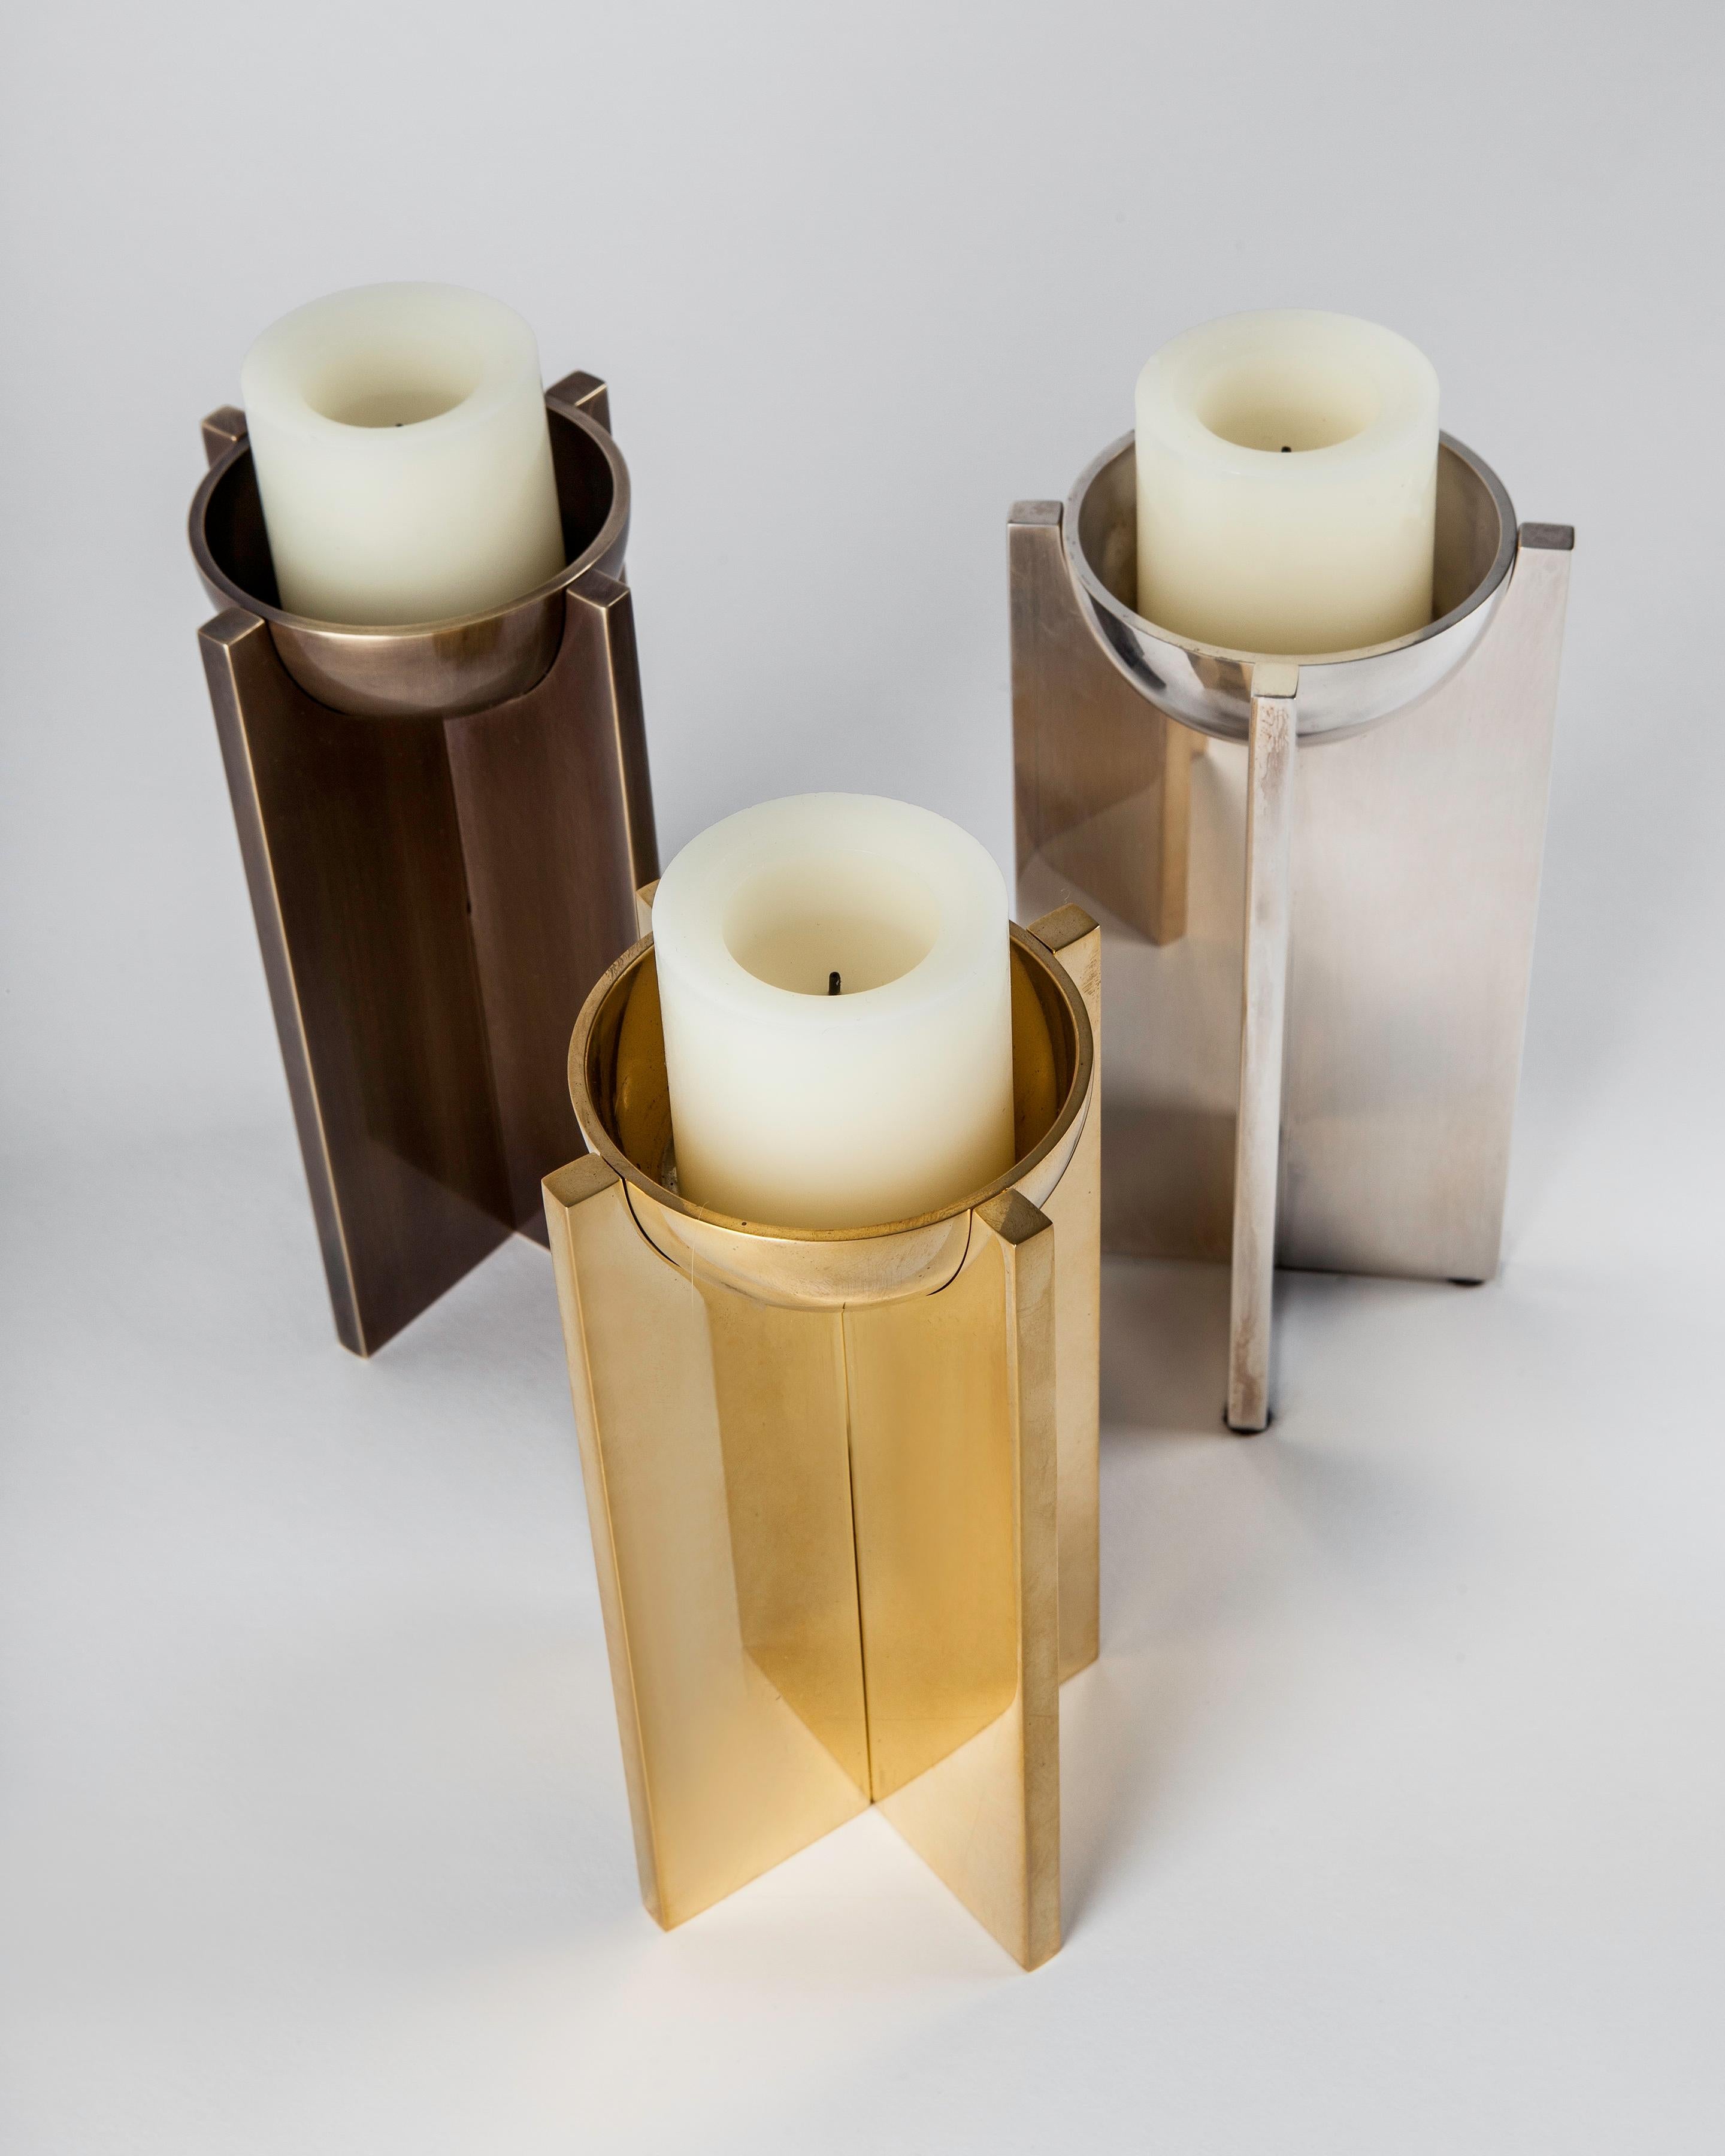 Modern XOXO Candlestick by Remains Lighting Co. in a Hand Polished Silverplate Finish